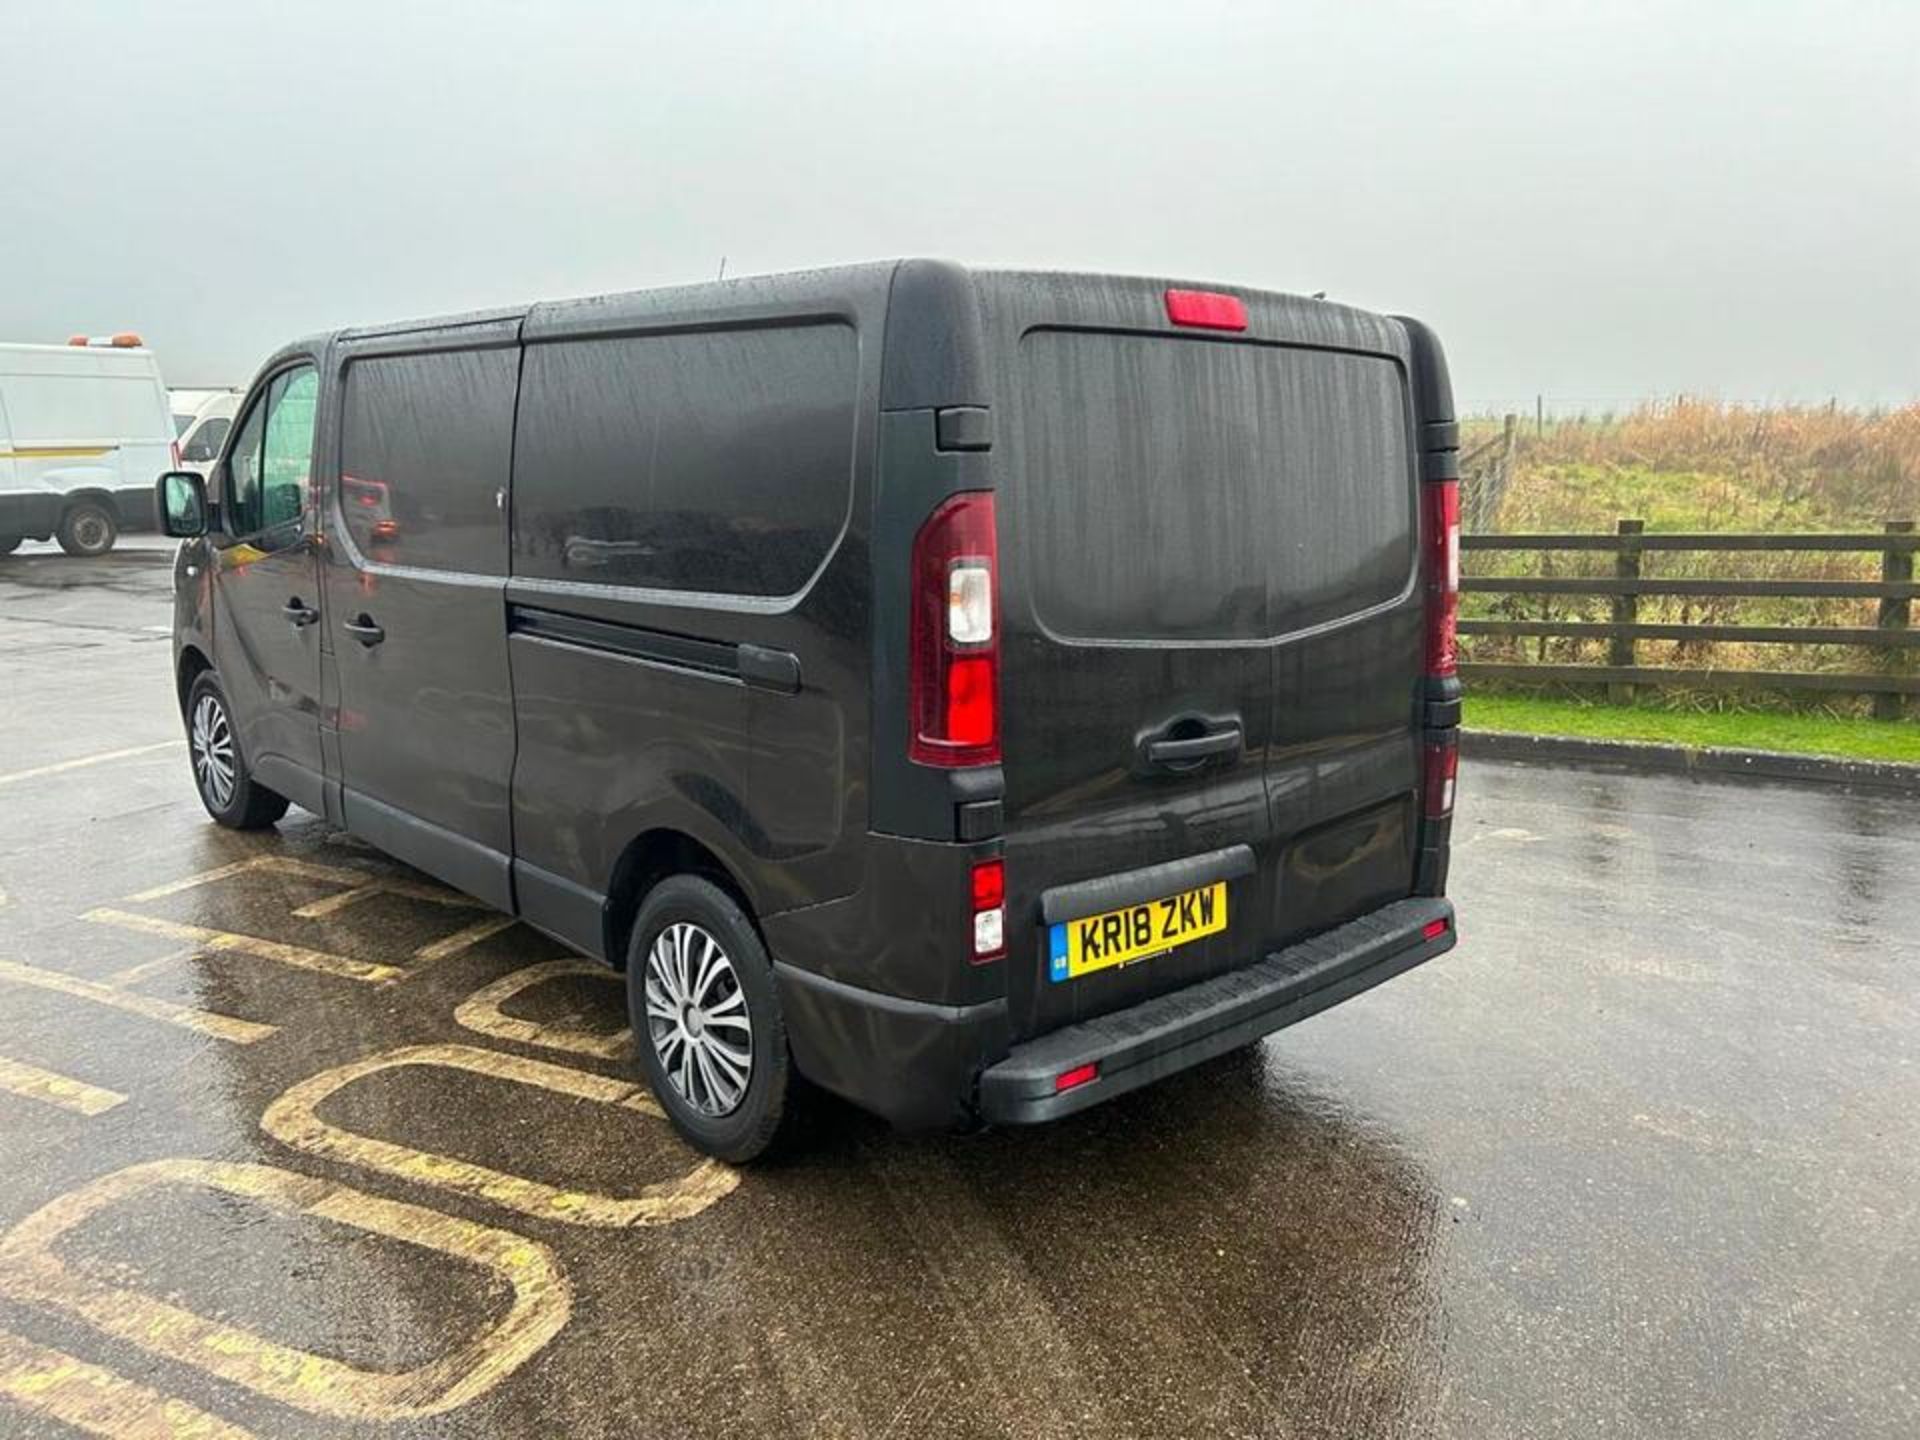 2018 VAUXHALL VIVARO SPORTIVE - 152K MILES- HPI CLEAR- READY FOR ACTION! - Image 3 of 10